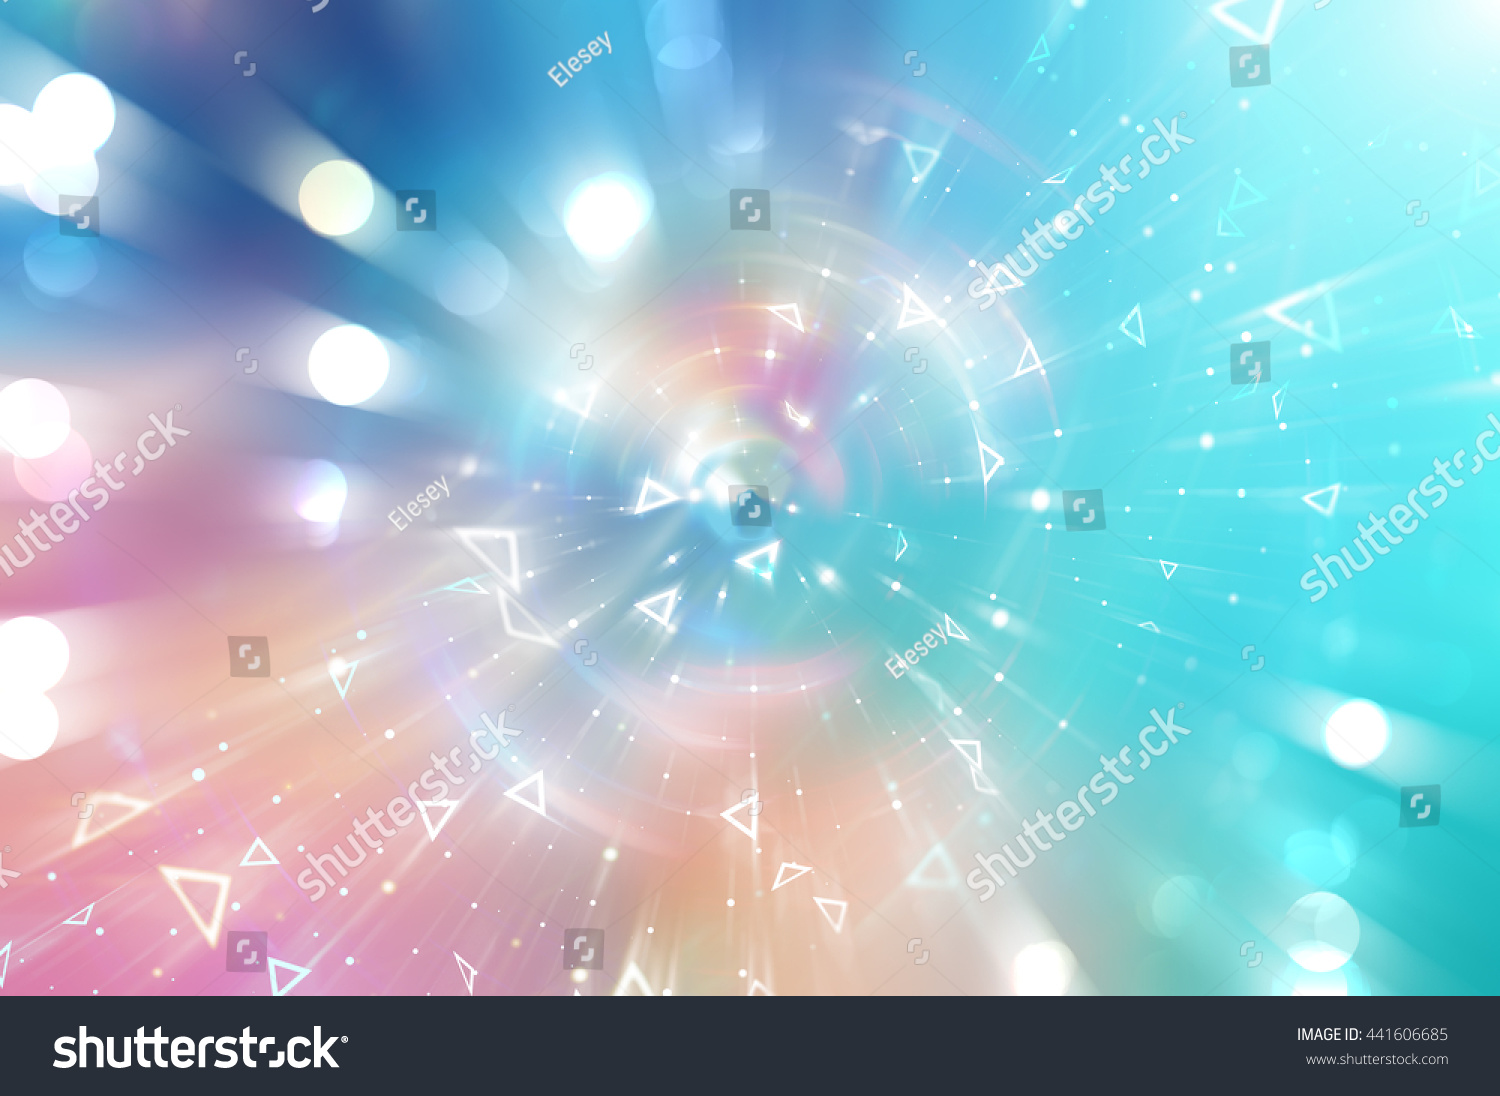 Abstract blue background. Explosion star. #441606685